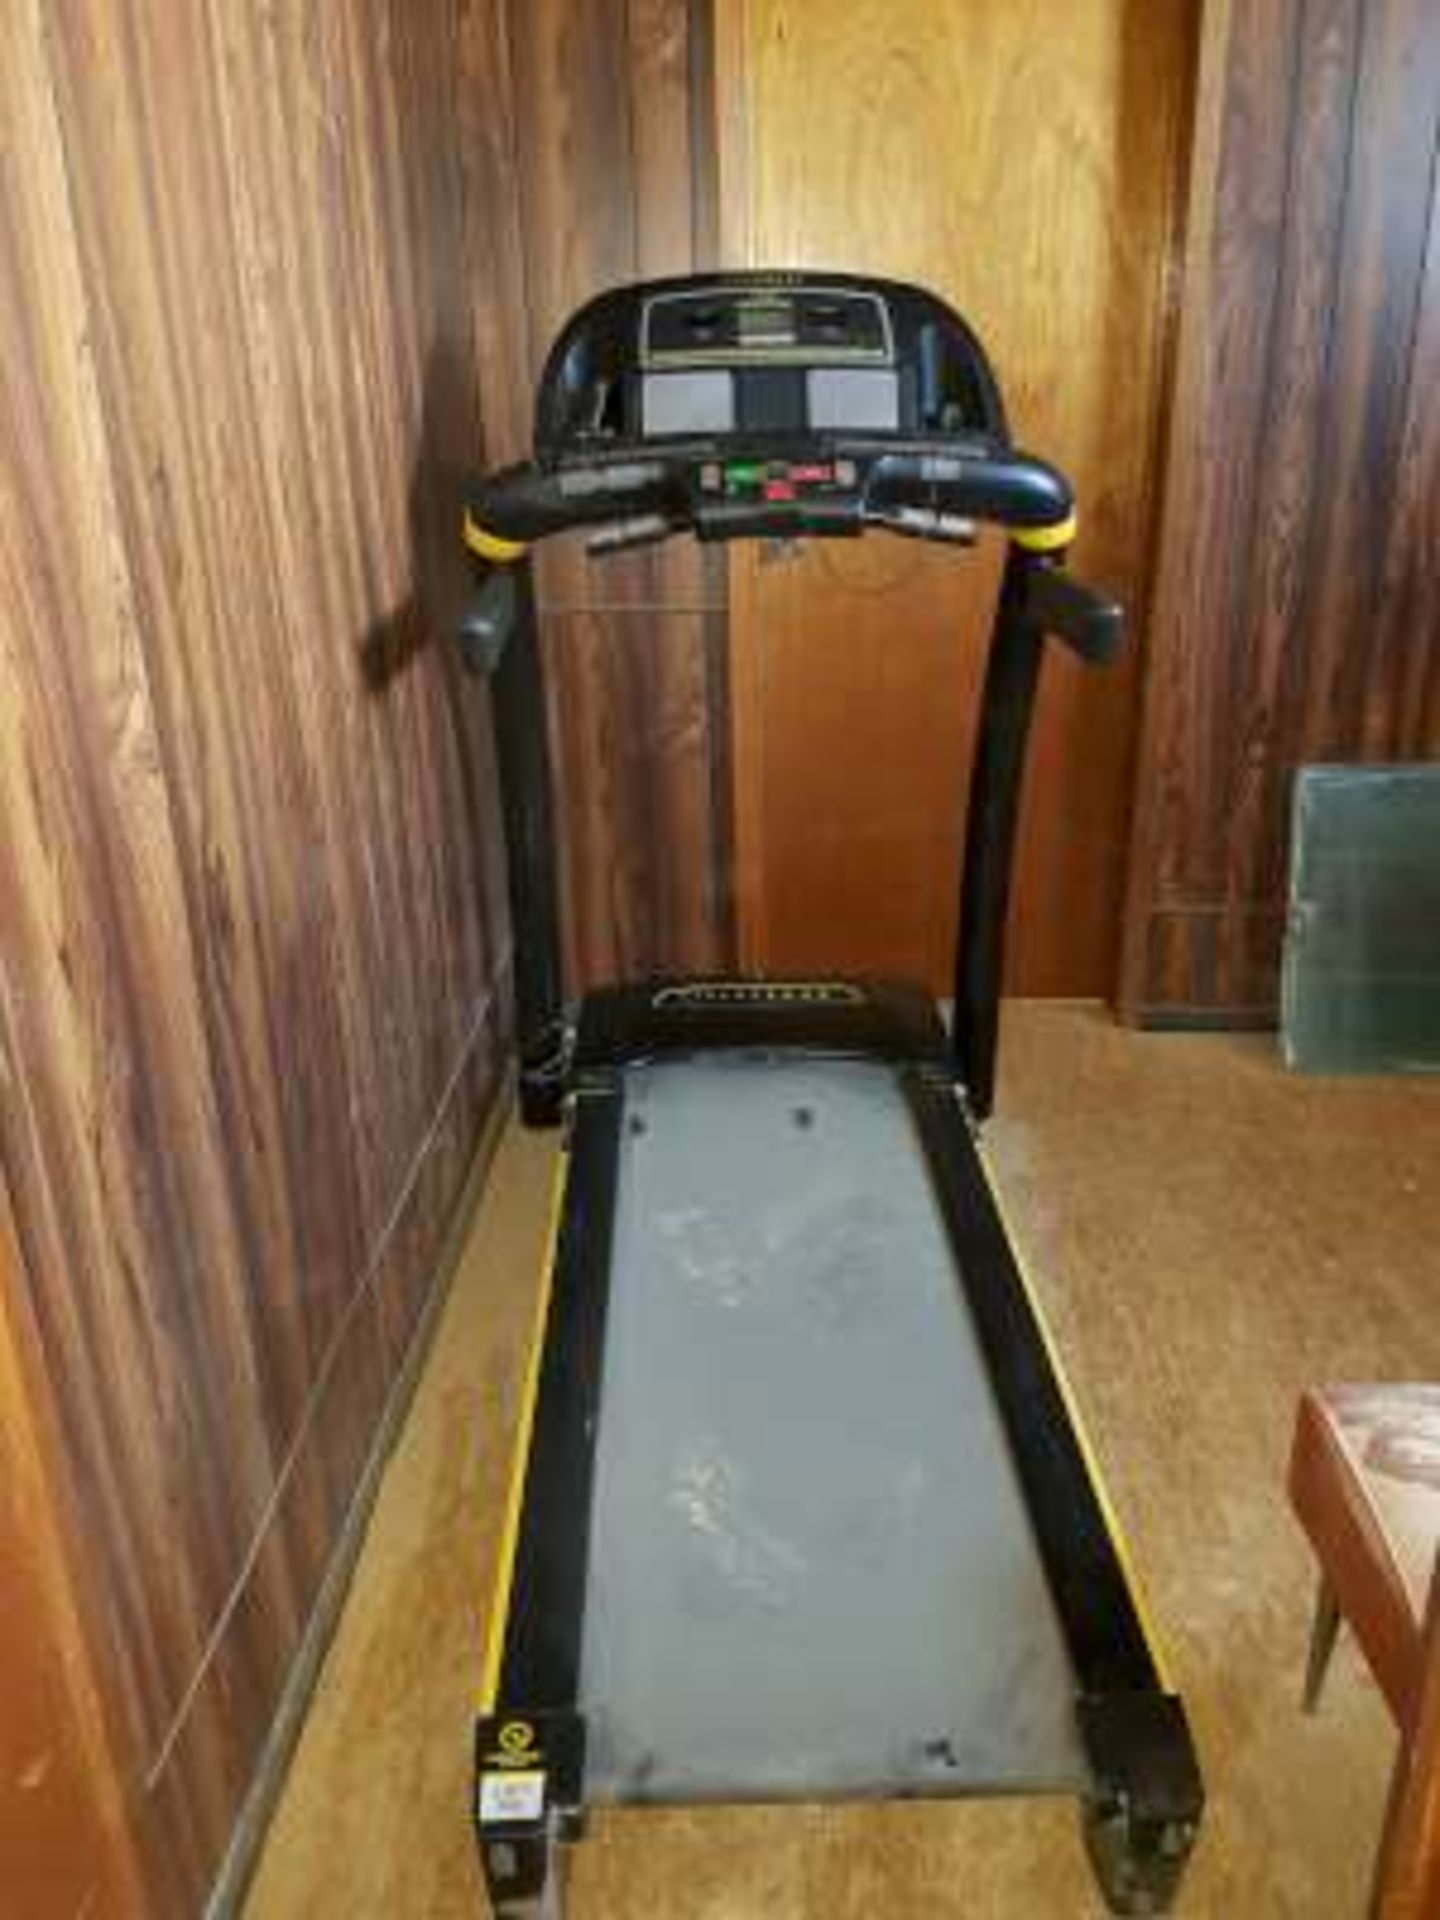 LiveStrong Treadmill(many exercise options modes)